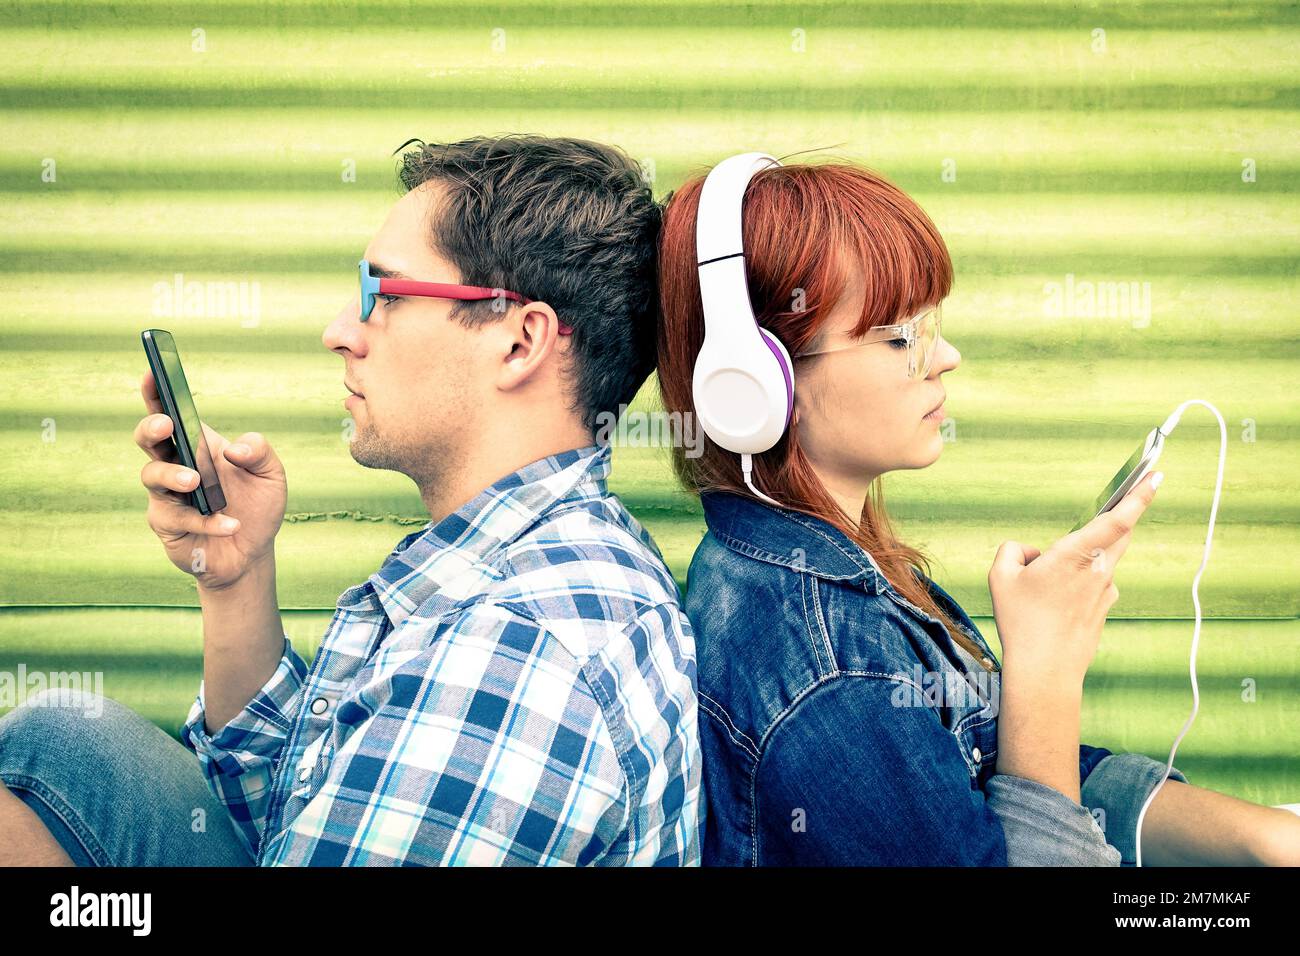 Hipster couple in disinterest moment with mobile phones - Concept of apathy sadness and isolation using new technologies - Boyfriend and girlfriend wi Stock Photo